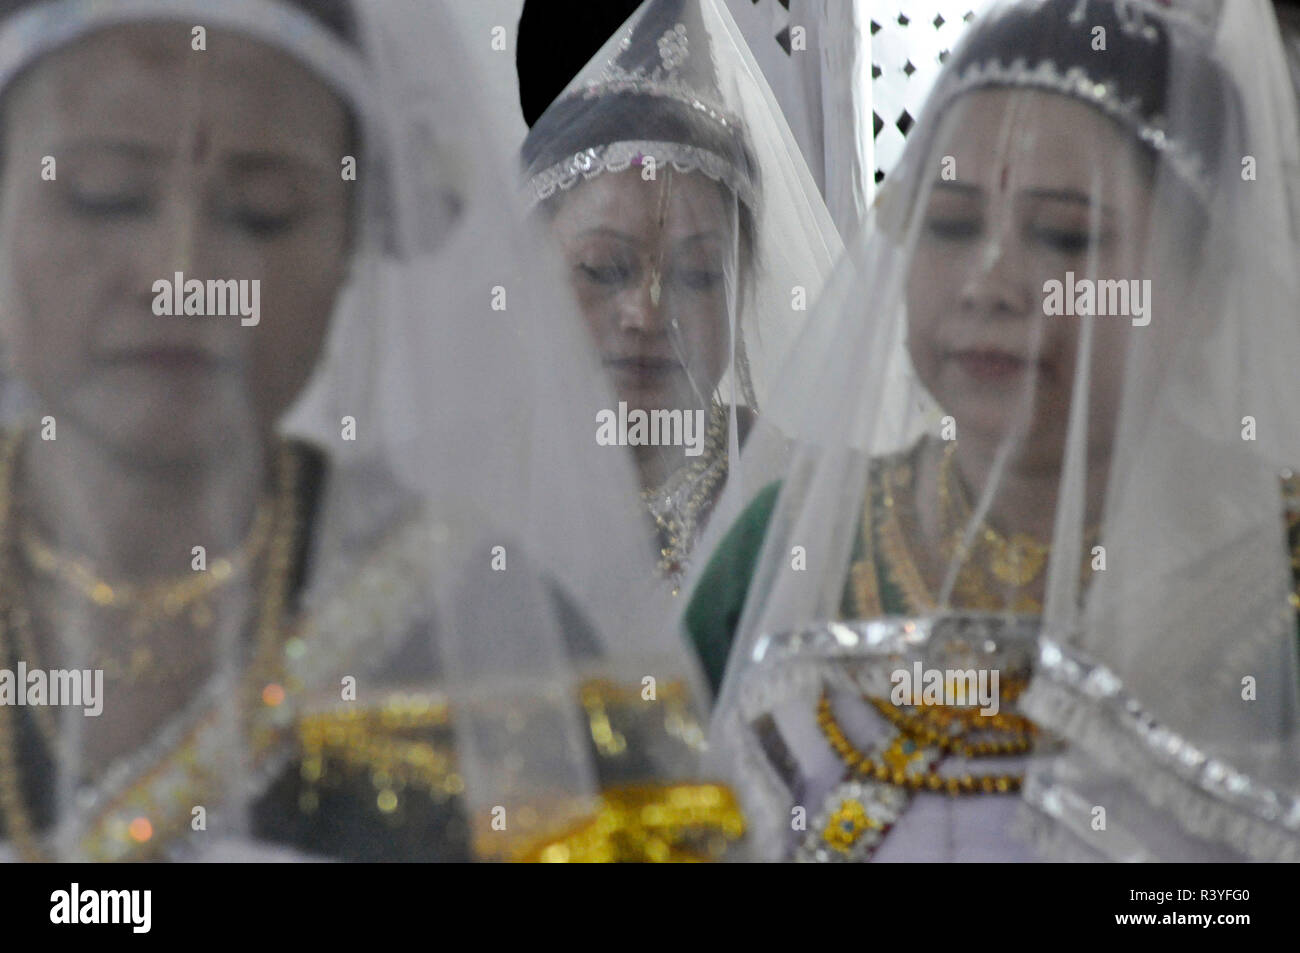 Dancers seen performing the traditional dance in Rash Purnima with their heads covered in veils during the event. Birthday celebration of Shri Mahaprabhu on the Phalguni Purnima (i.e. on the Full moon day). Many devotees from worldwide make a pilgrimage on the auspicious occasion. Stock Photo